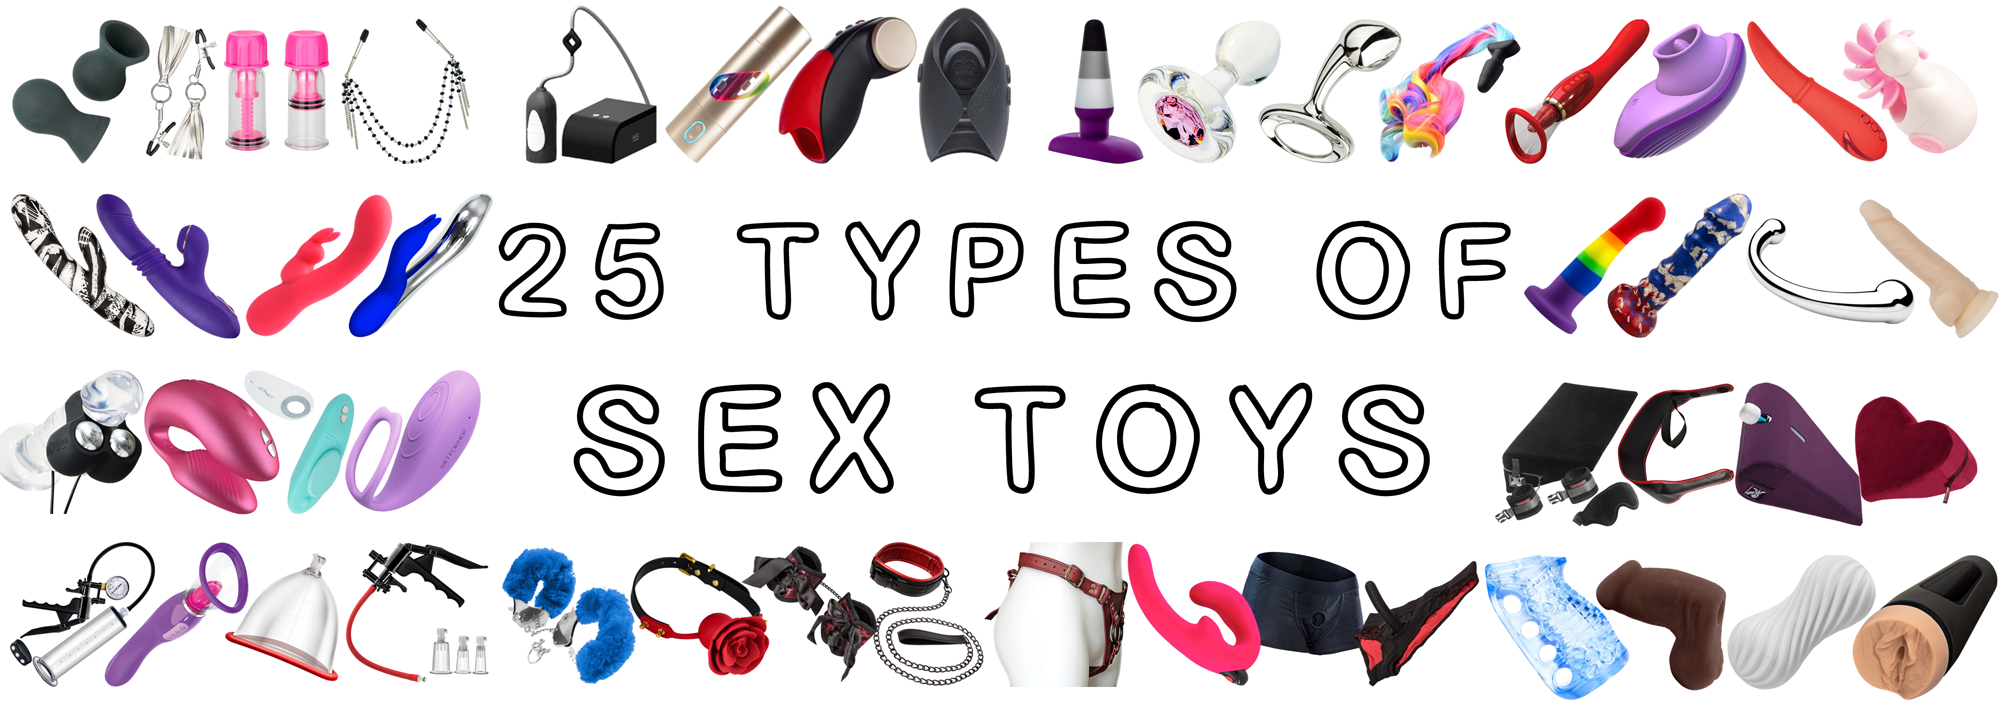 25 Types of Sex Toys: A Guide to Help You Know What's Out There - Betty  Butch